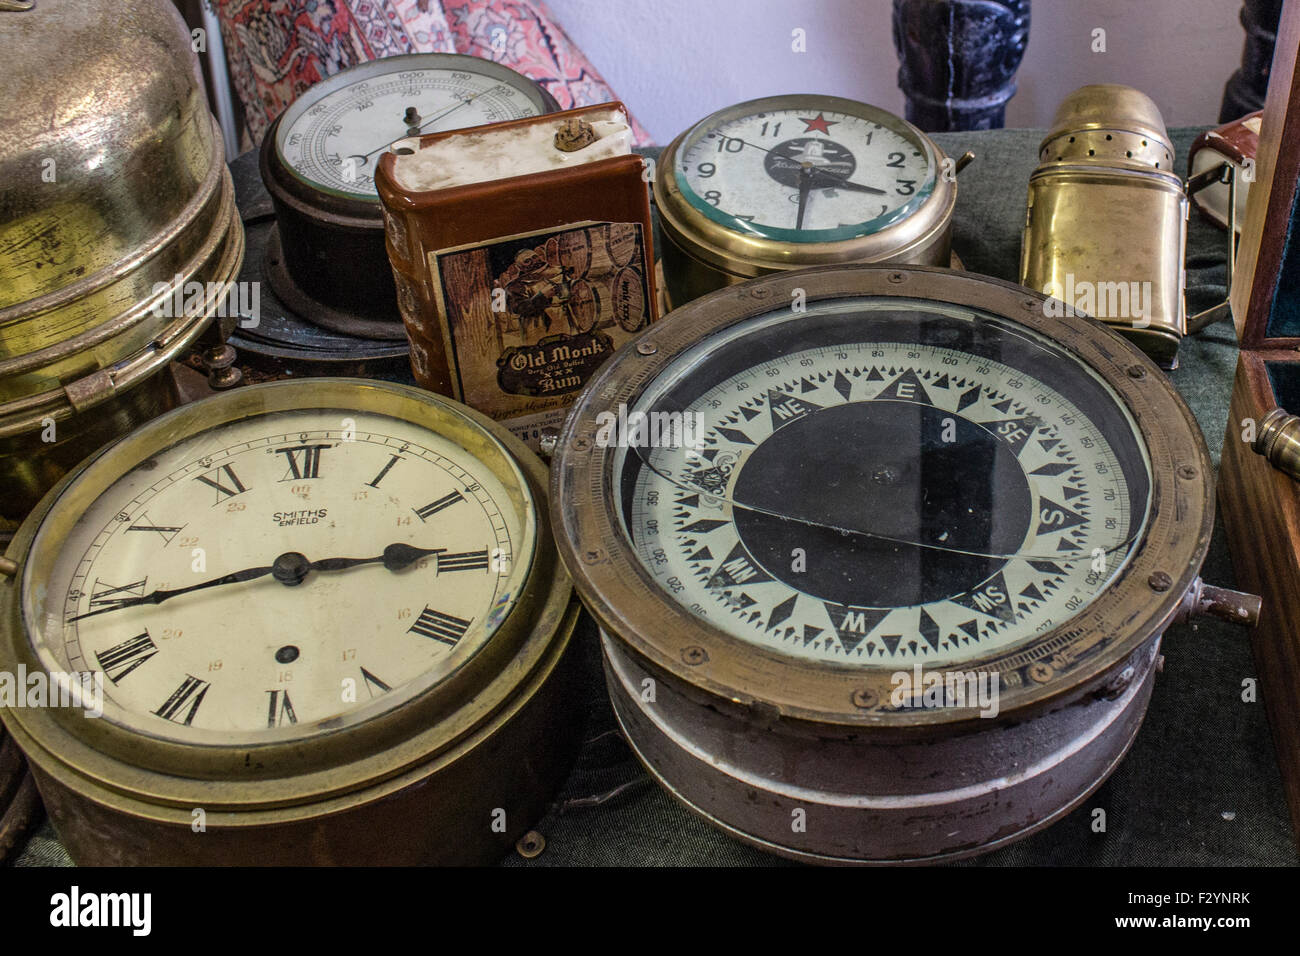 Old clocks and barometers in junk shop, County Kerry Ireland Stock Photo